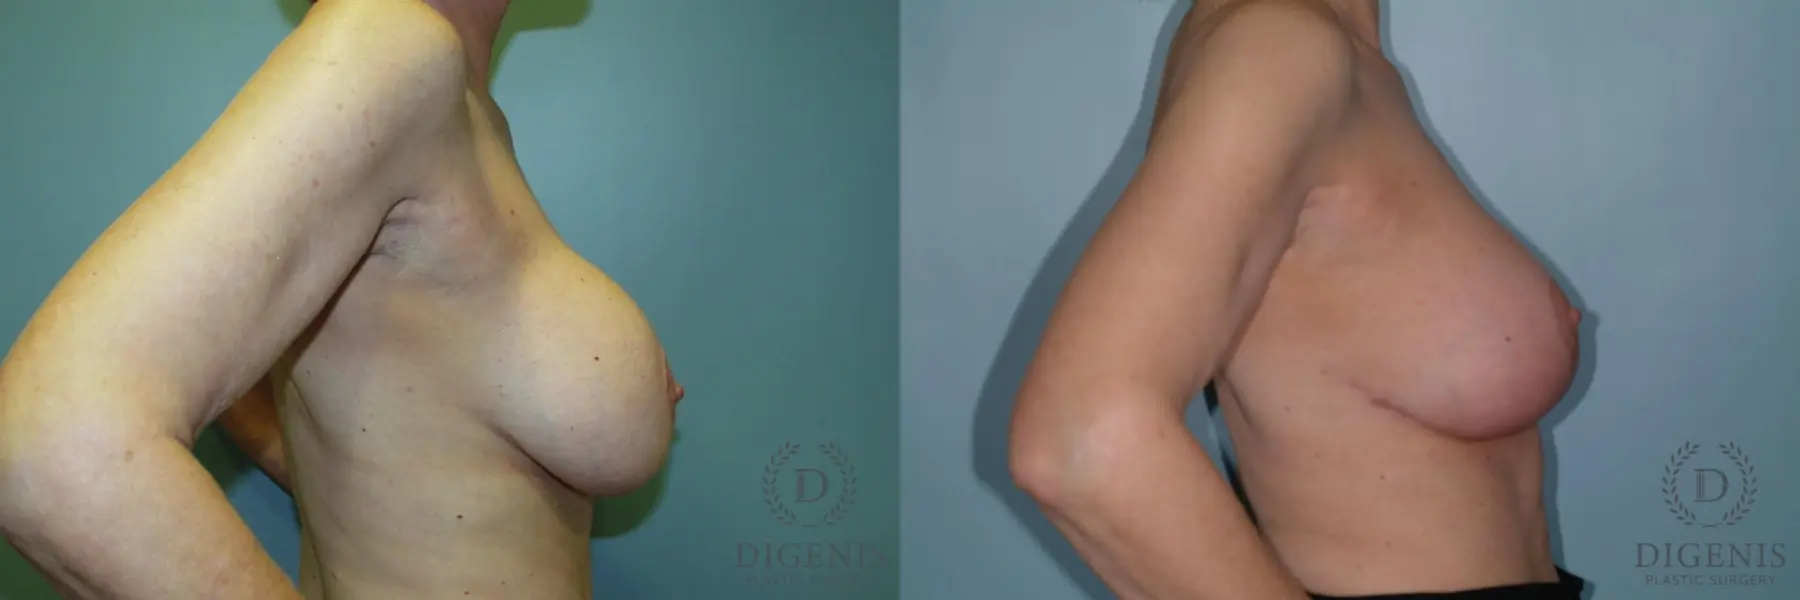 Breast Lift With Implants: Patient 6 - Before and After 3